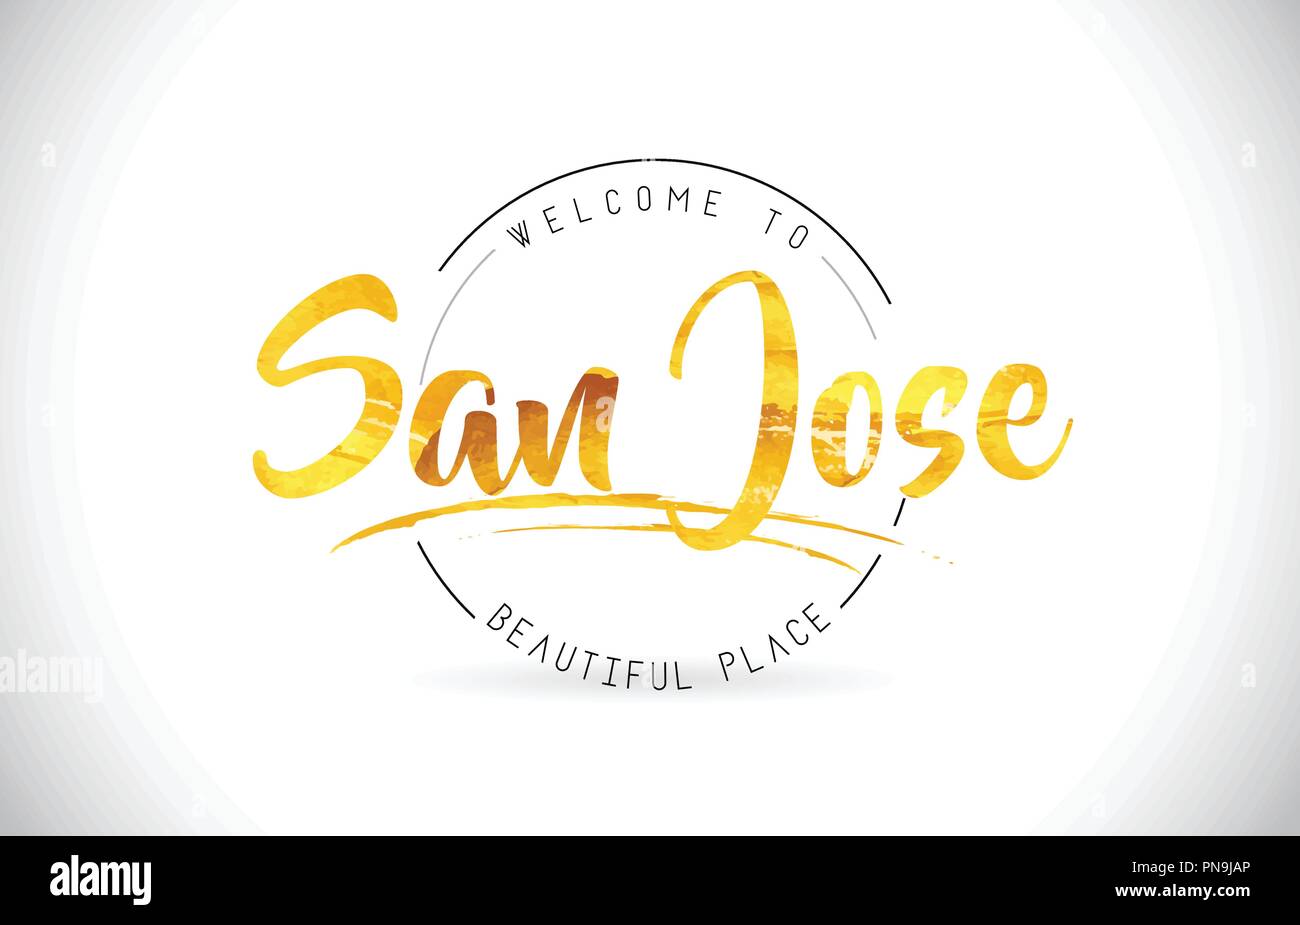 San Jose Welcome To Word Text with Handwritten Font and Golden Texture Design Illustration Vector. Stock Vector